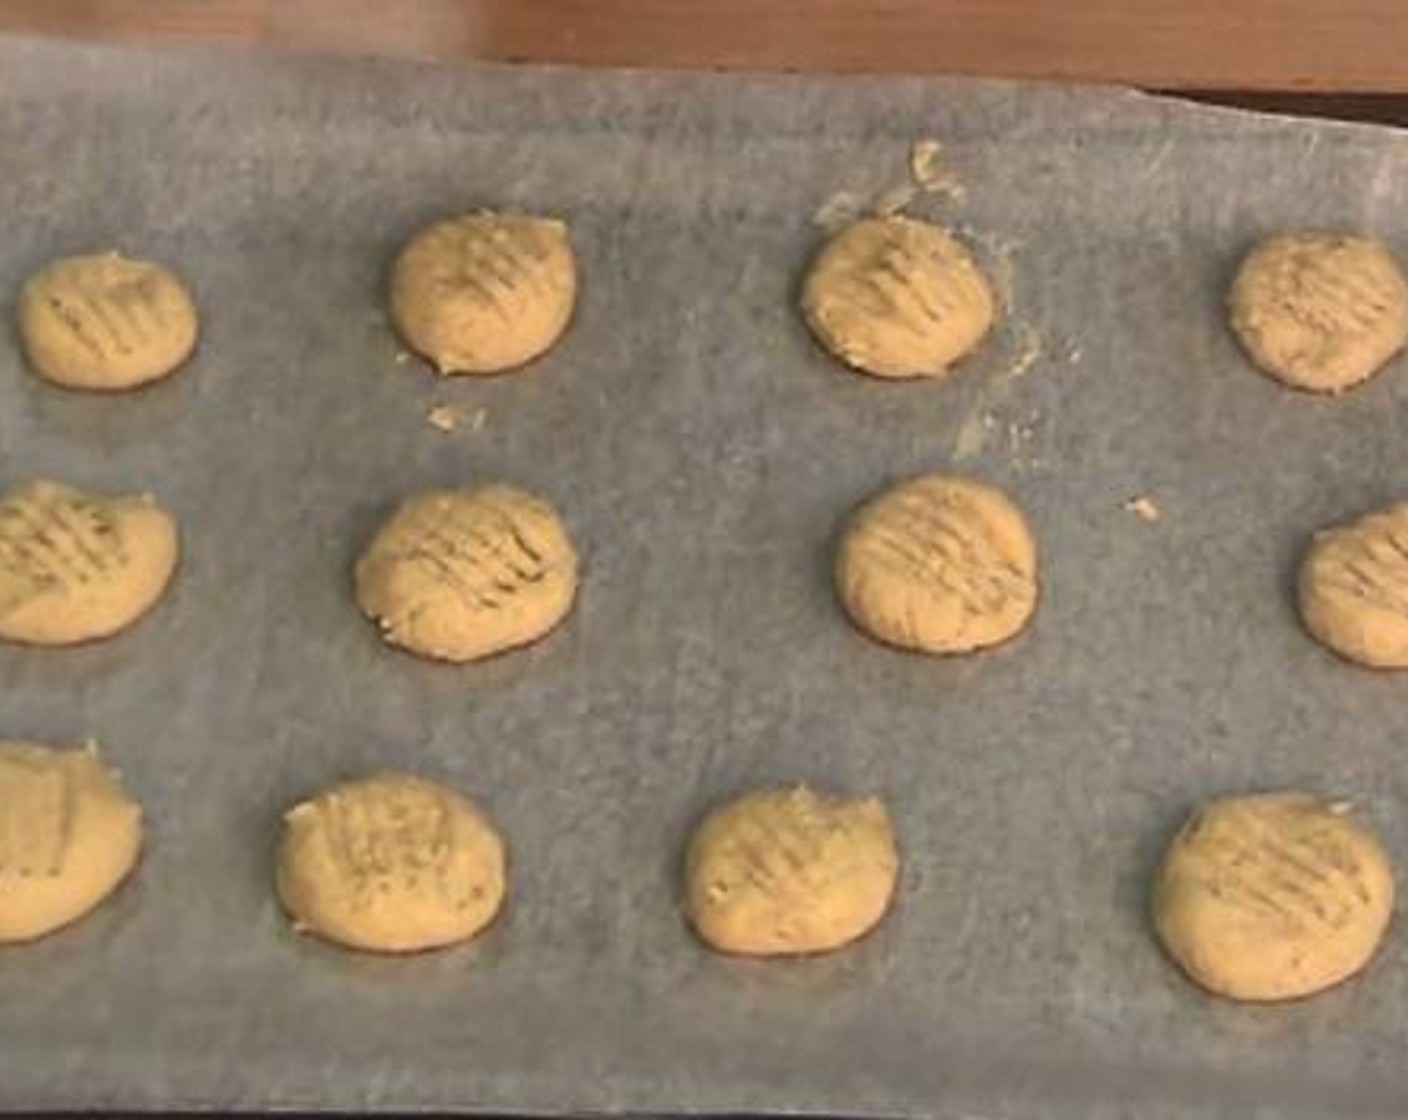 step 3 Using your hands, make the dough into cookies. Place each cookie dough on a baking tray lined with baking paper, and bake under 160 degrees C (320 degrees F) for about 20 minutes.